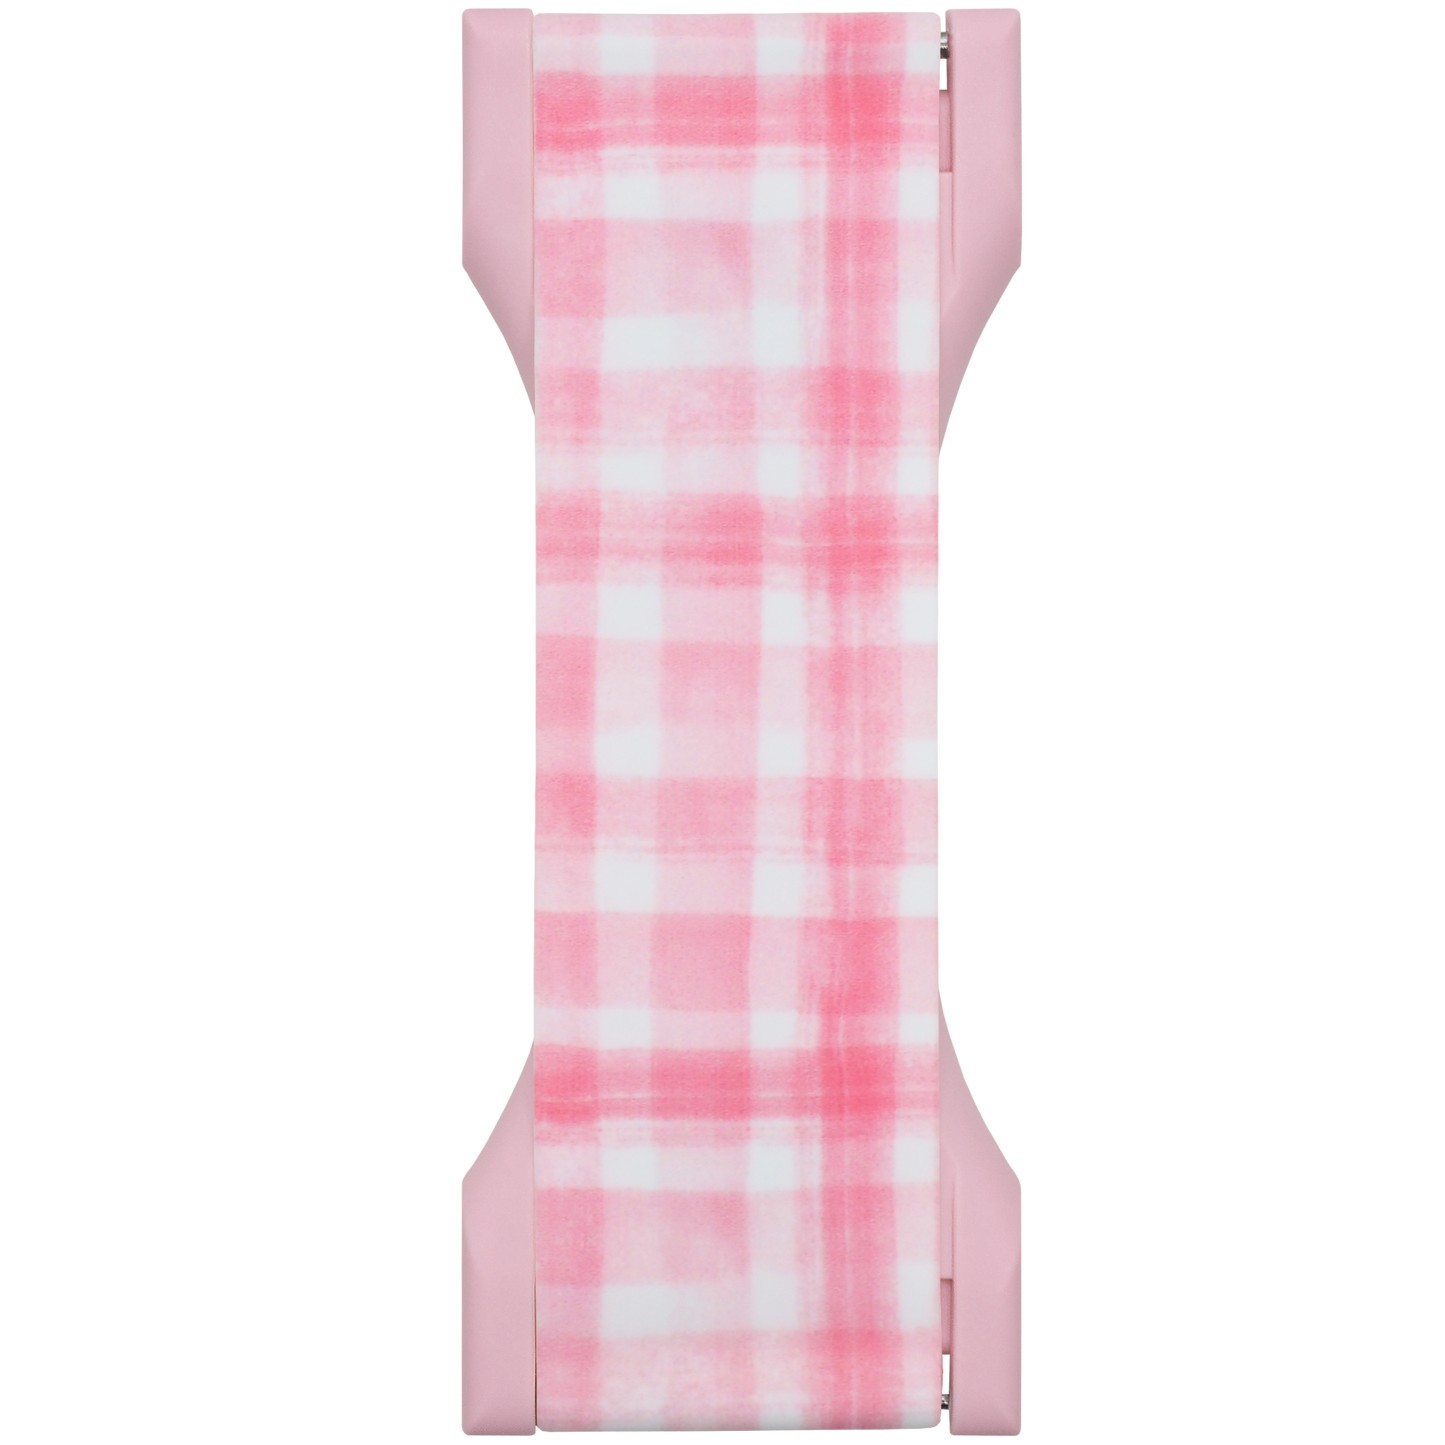 PRO Pink Gingham Phone Grip & Stand